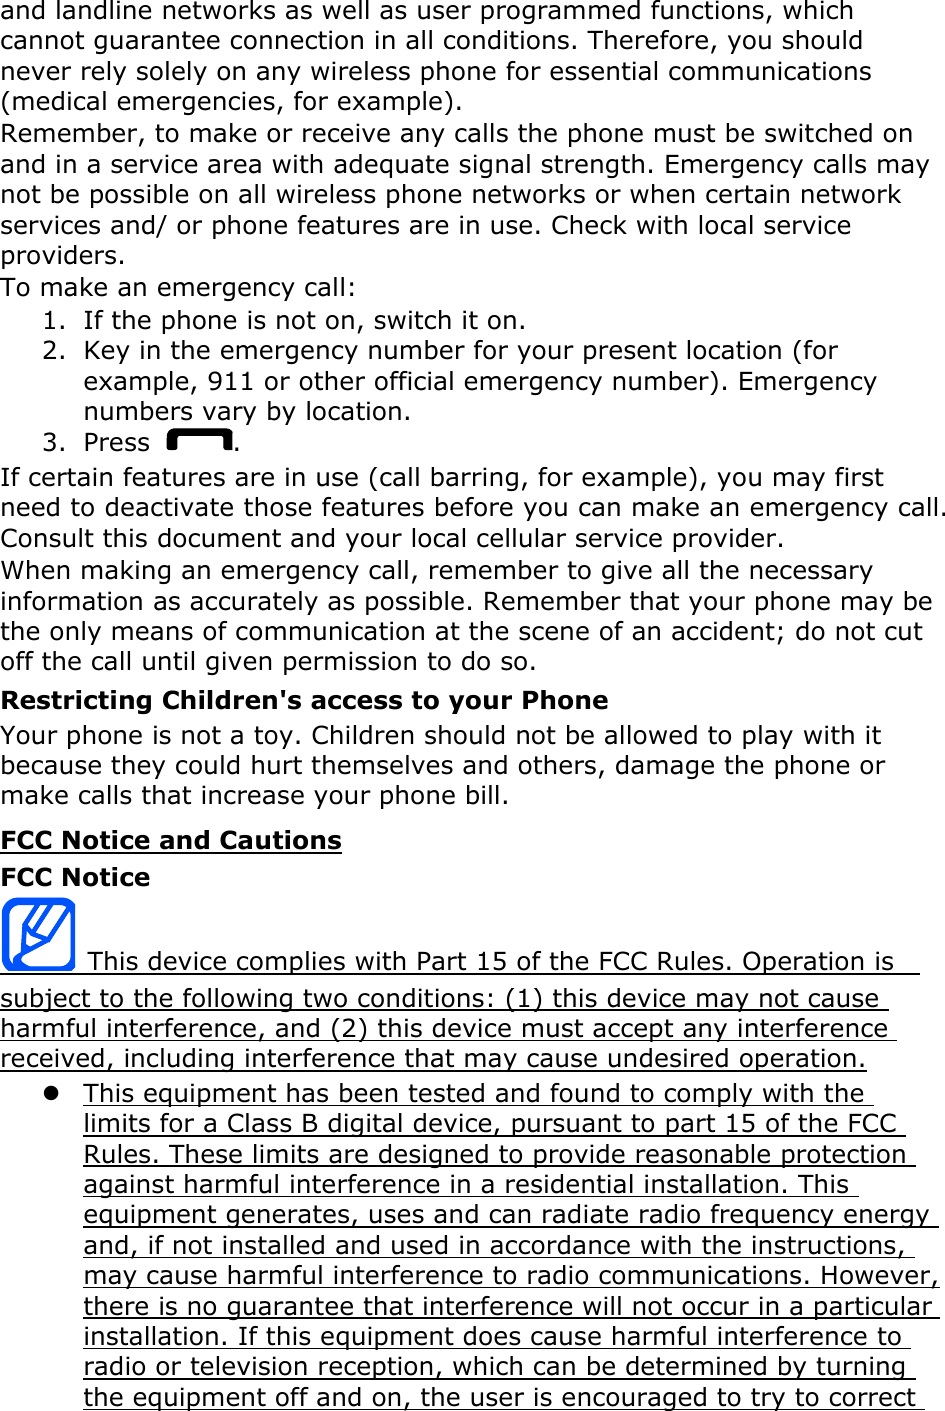 Page 16 of Samsung Electronics Co GTI8350T Cellular/PCS GSM/EDGE and Cellular WCDMA Phone with WLAN and Bluetooth User Manual